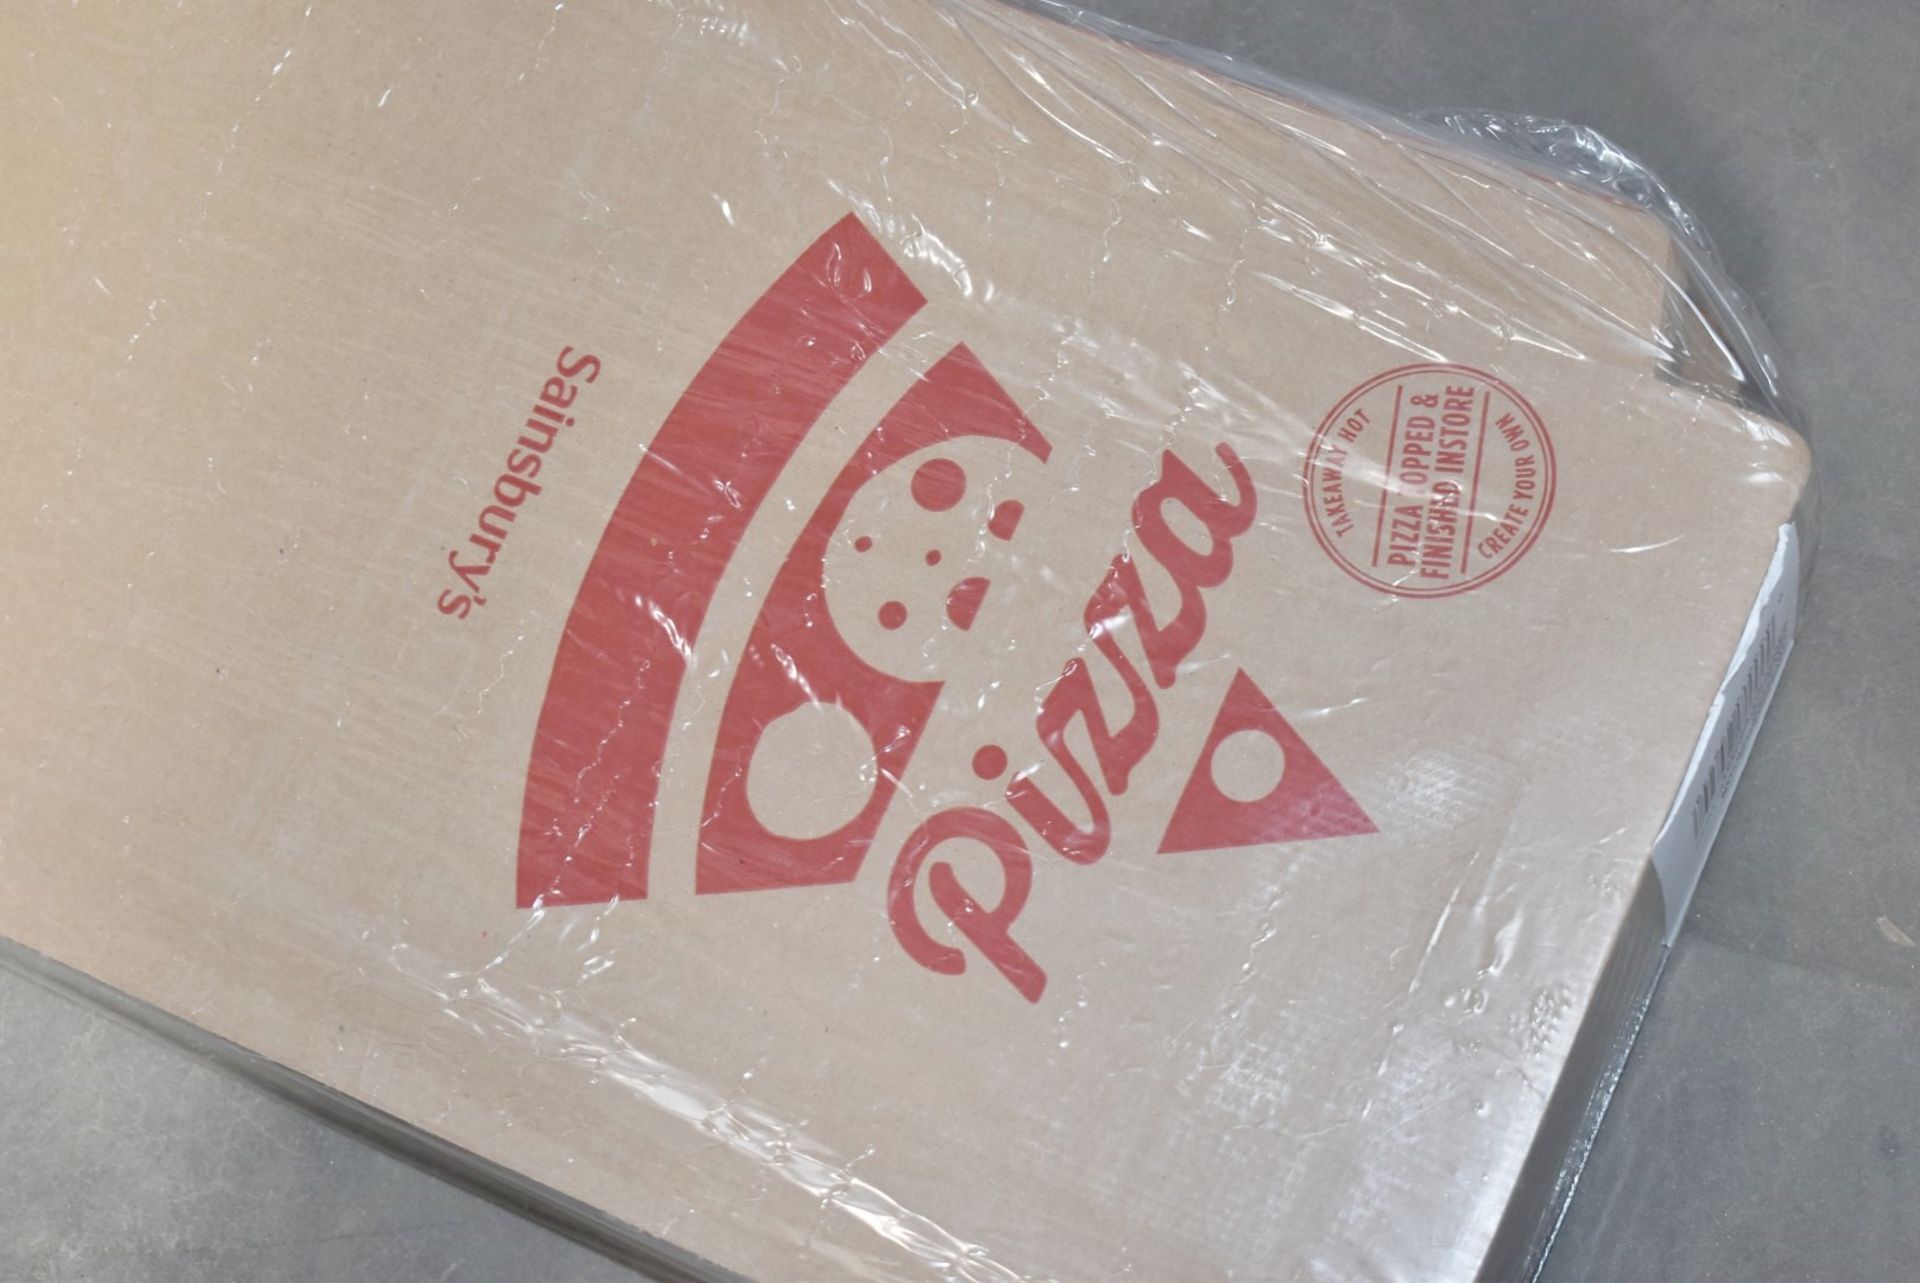 300 x Supermarket Branded 10 Inch Pizza Boxes - Includes 3 x Boxes of 100 - New and Sealed - CL232 - - Image 11 of 11